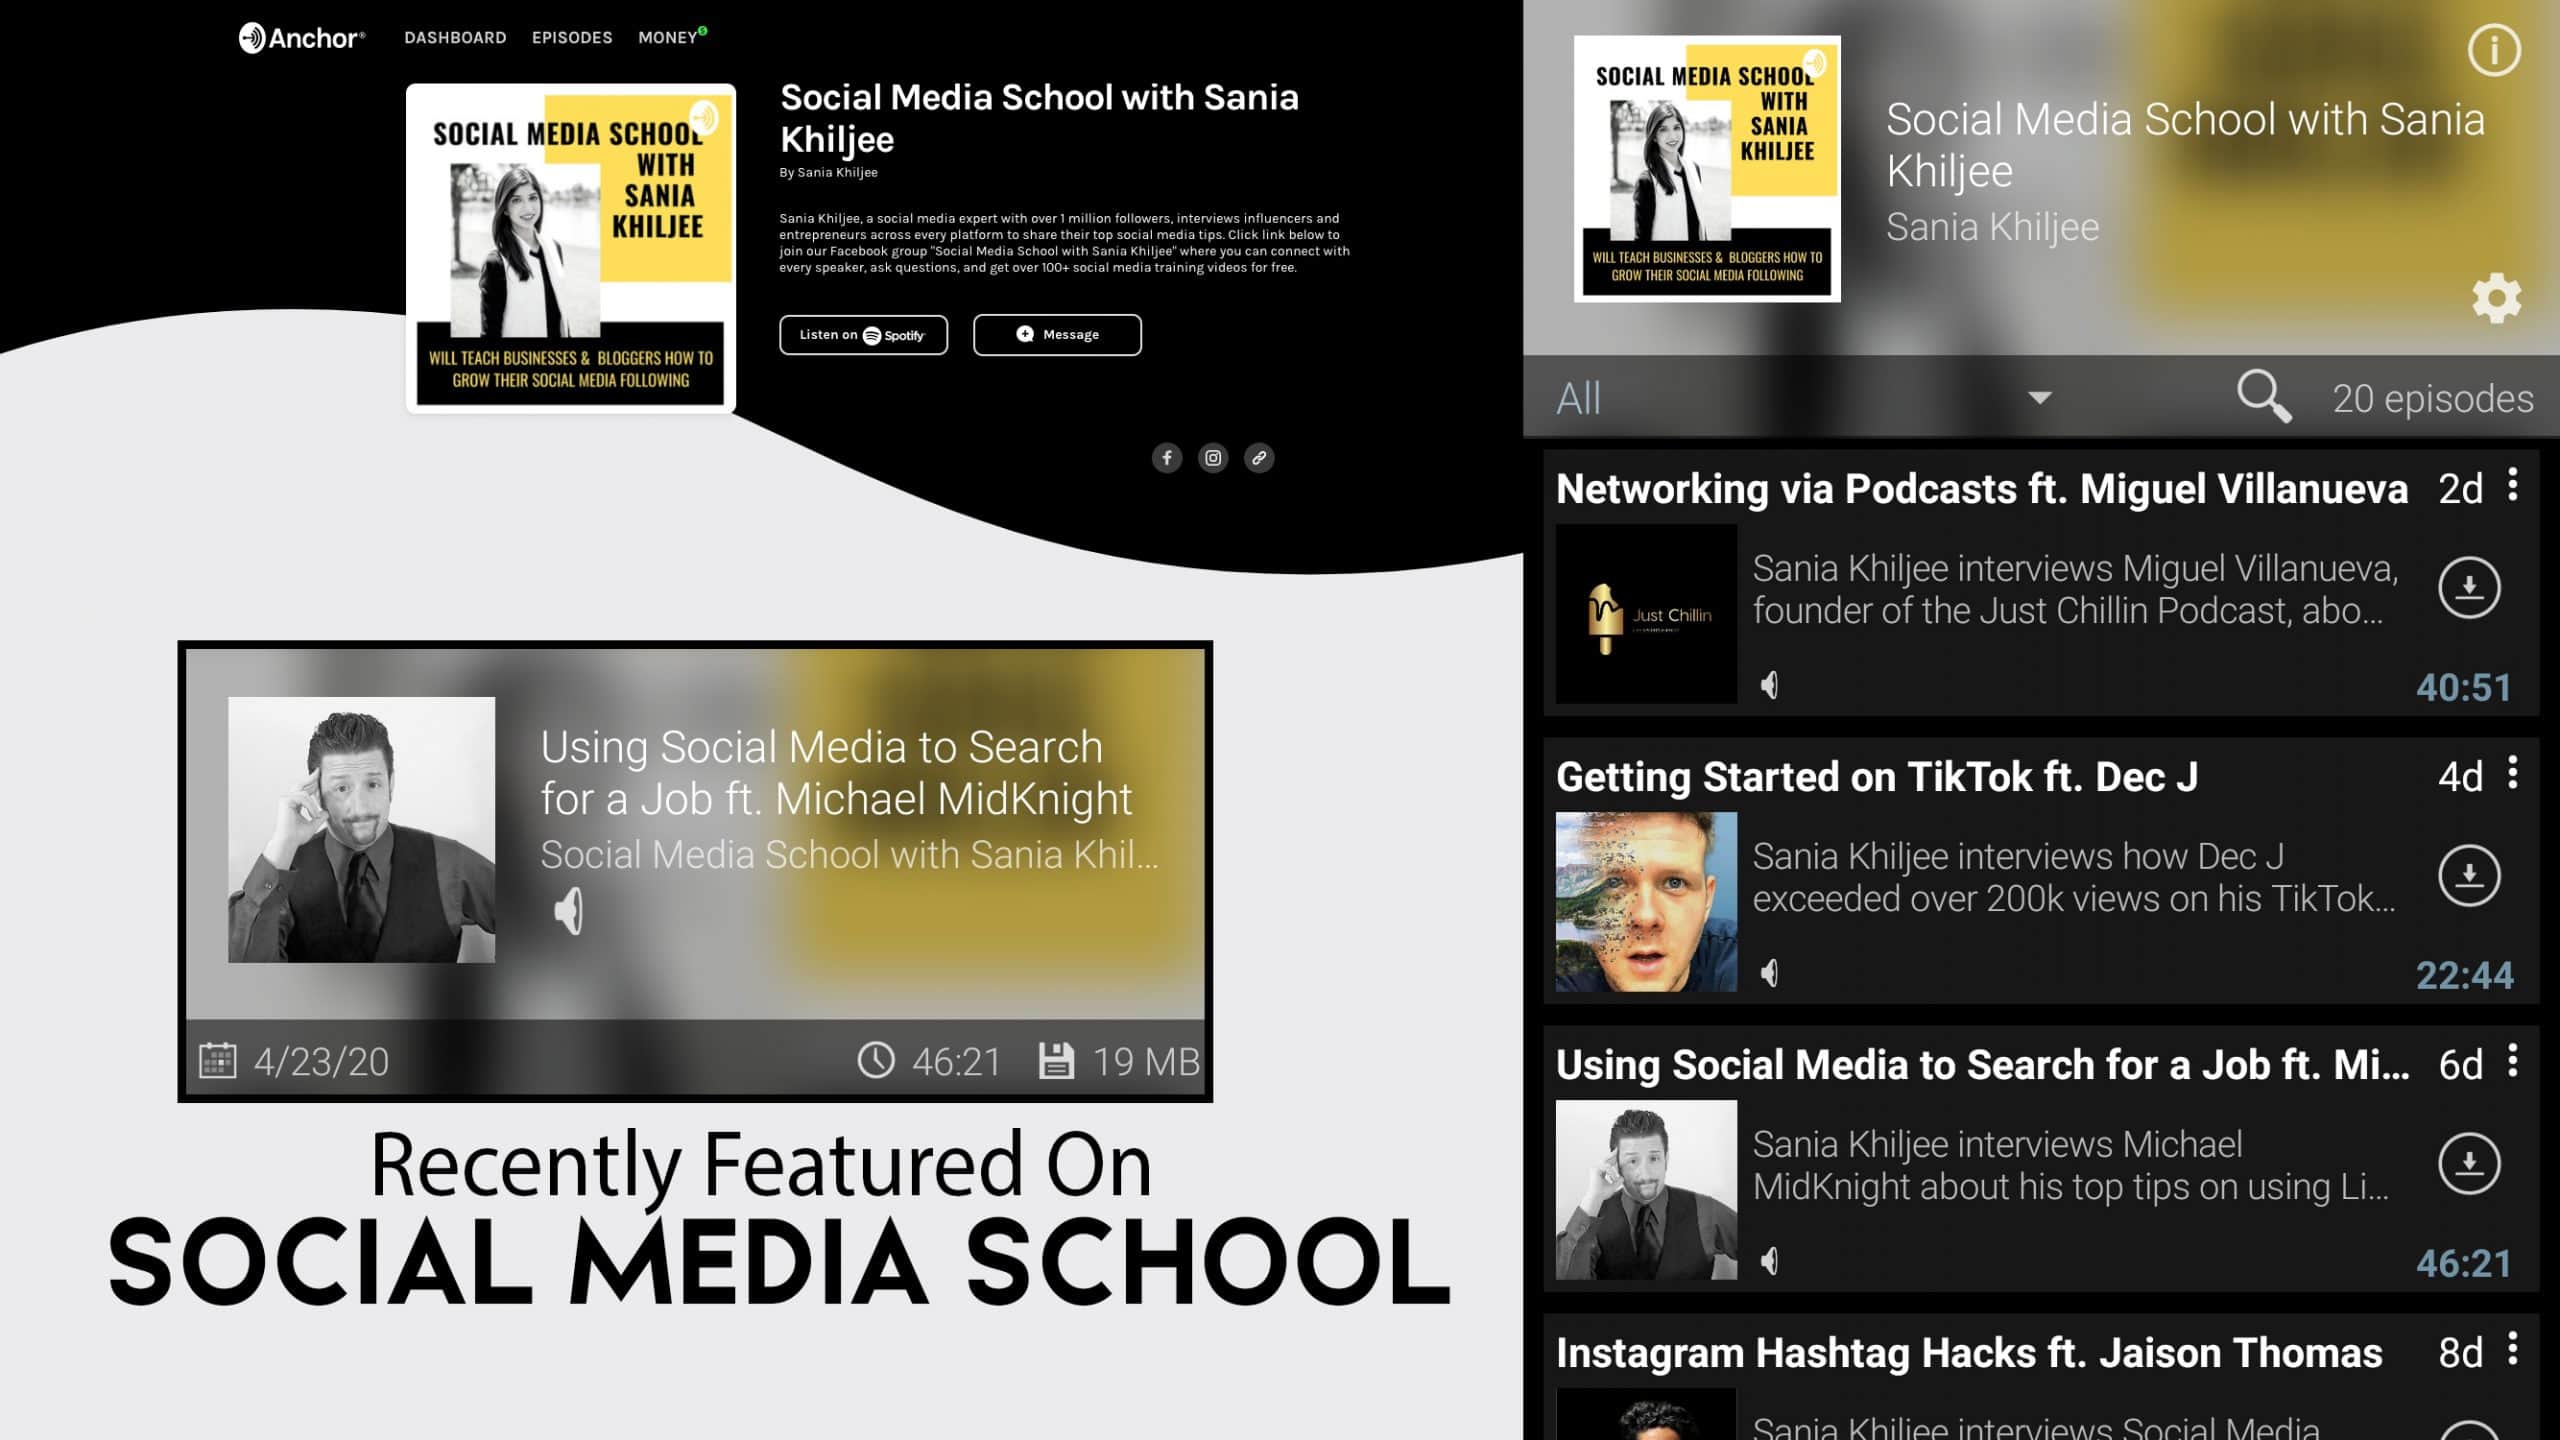 Recently Featured on Social Media School Podcast with Sania Khiljee: Using Social Media to Search for a Job ft. Michael MidKnight